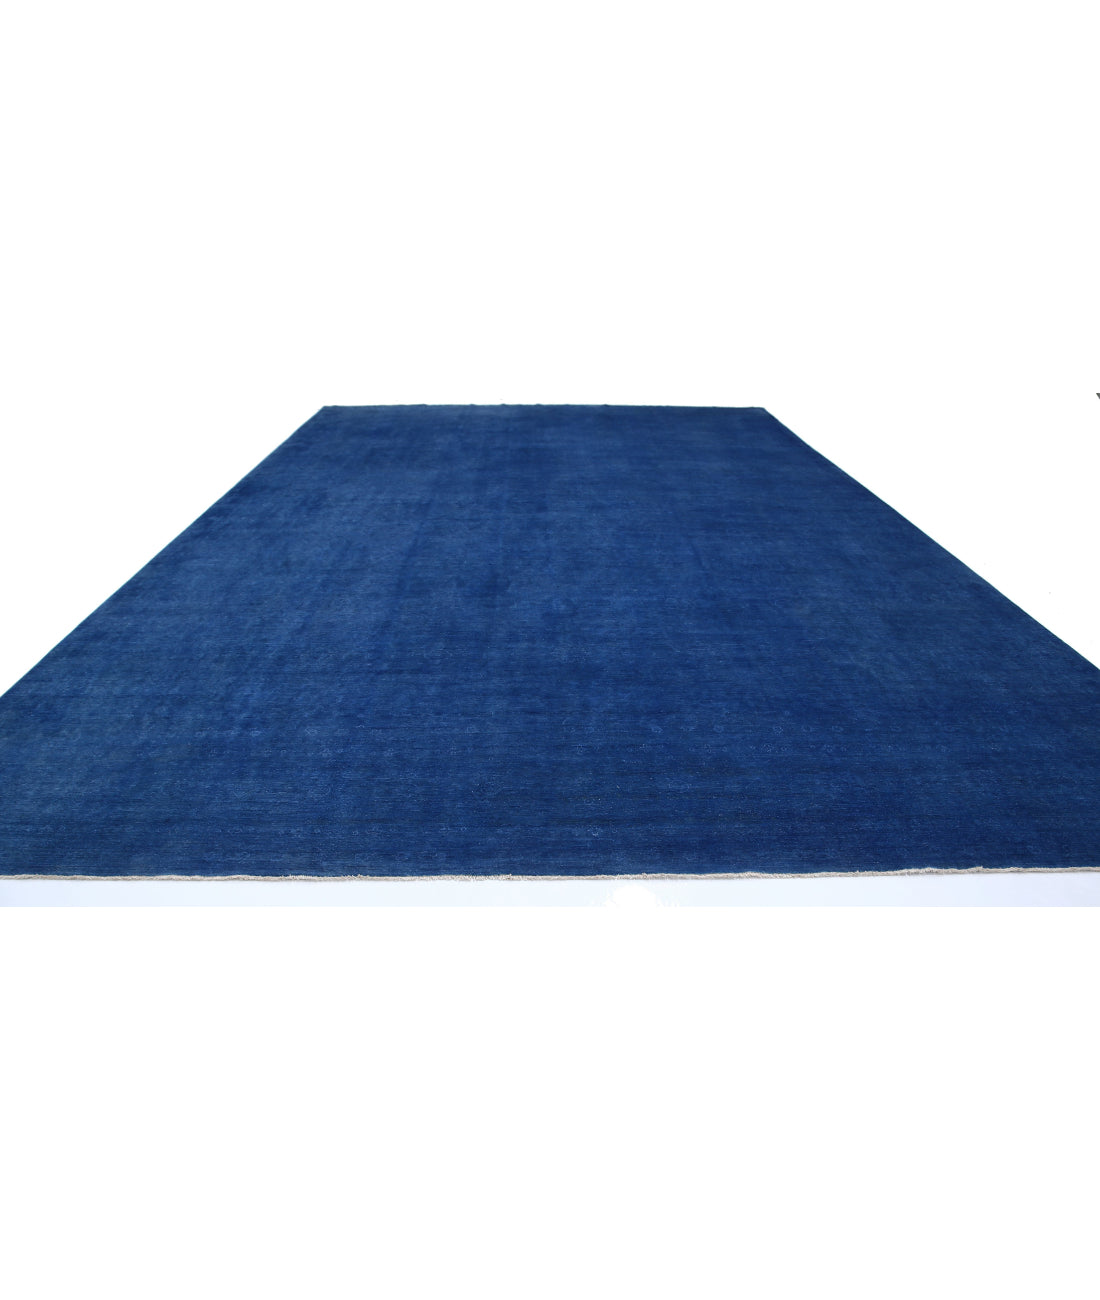 Hand Knotted Overdye Wool Rug - 14'1'' x 20'6'' 14'1'' x 20'6'' (423 X 615) / Blue / Blue